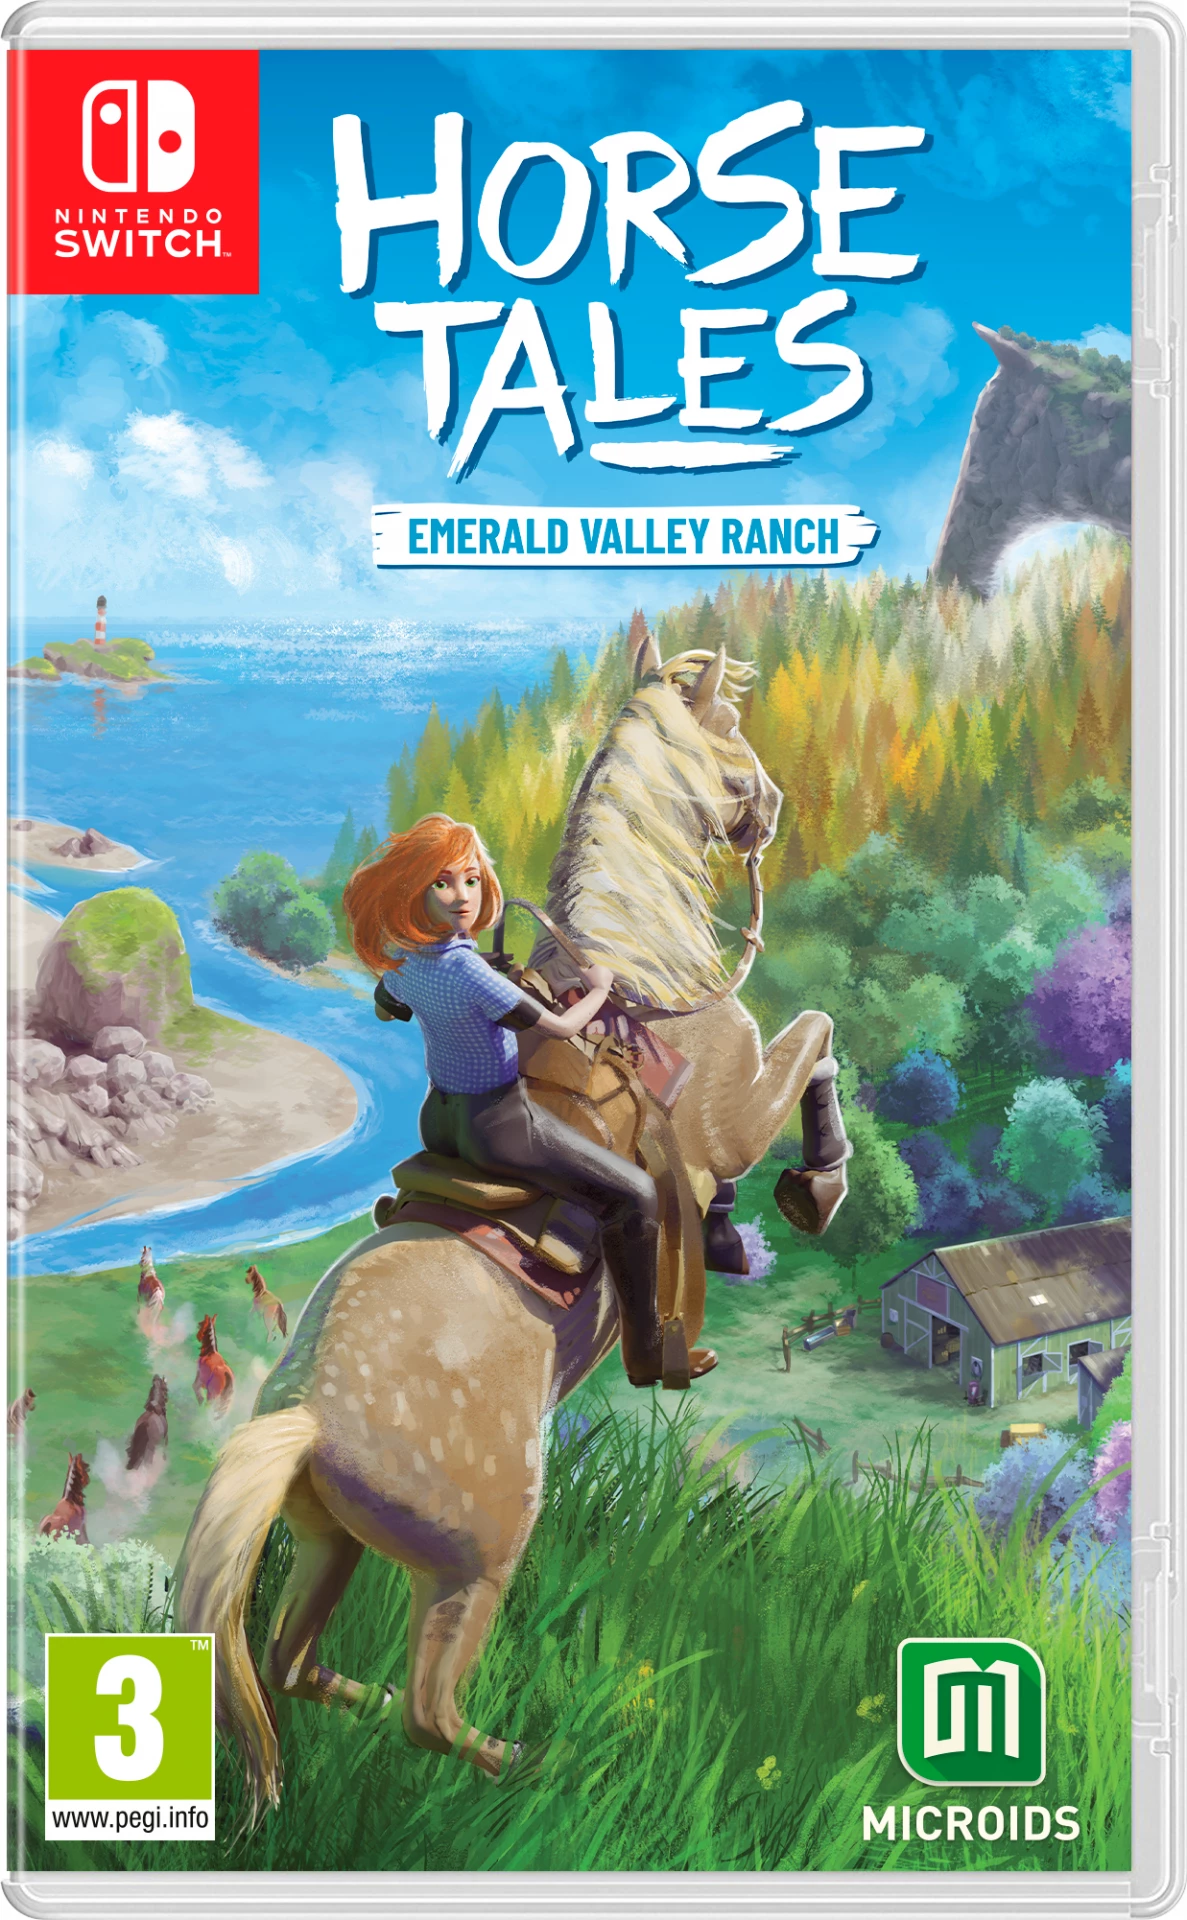 Horse Tales: Emerald Valley Ranch (Switch), Microids